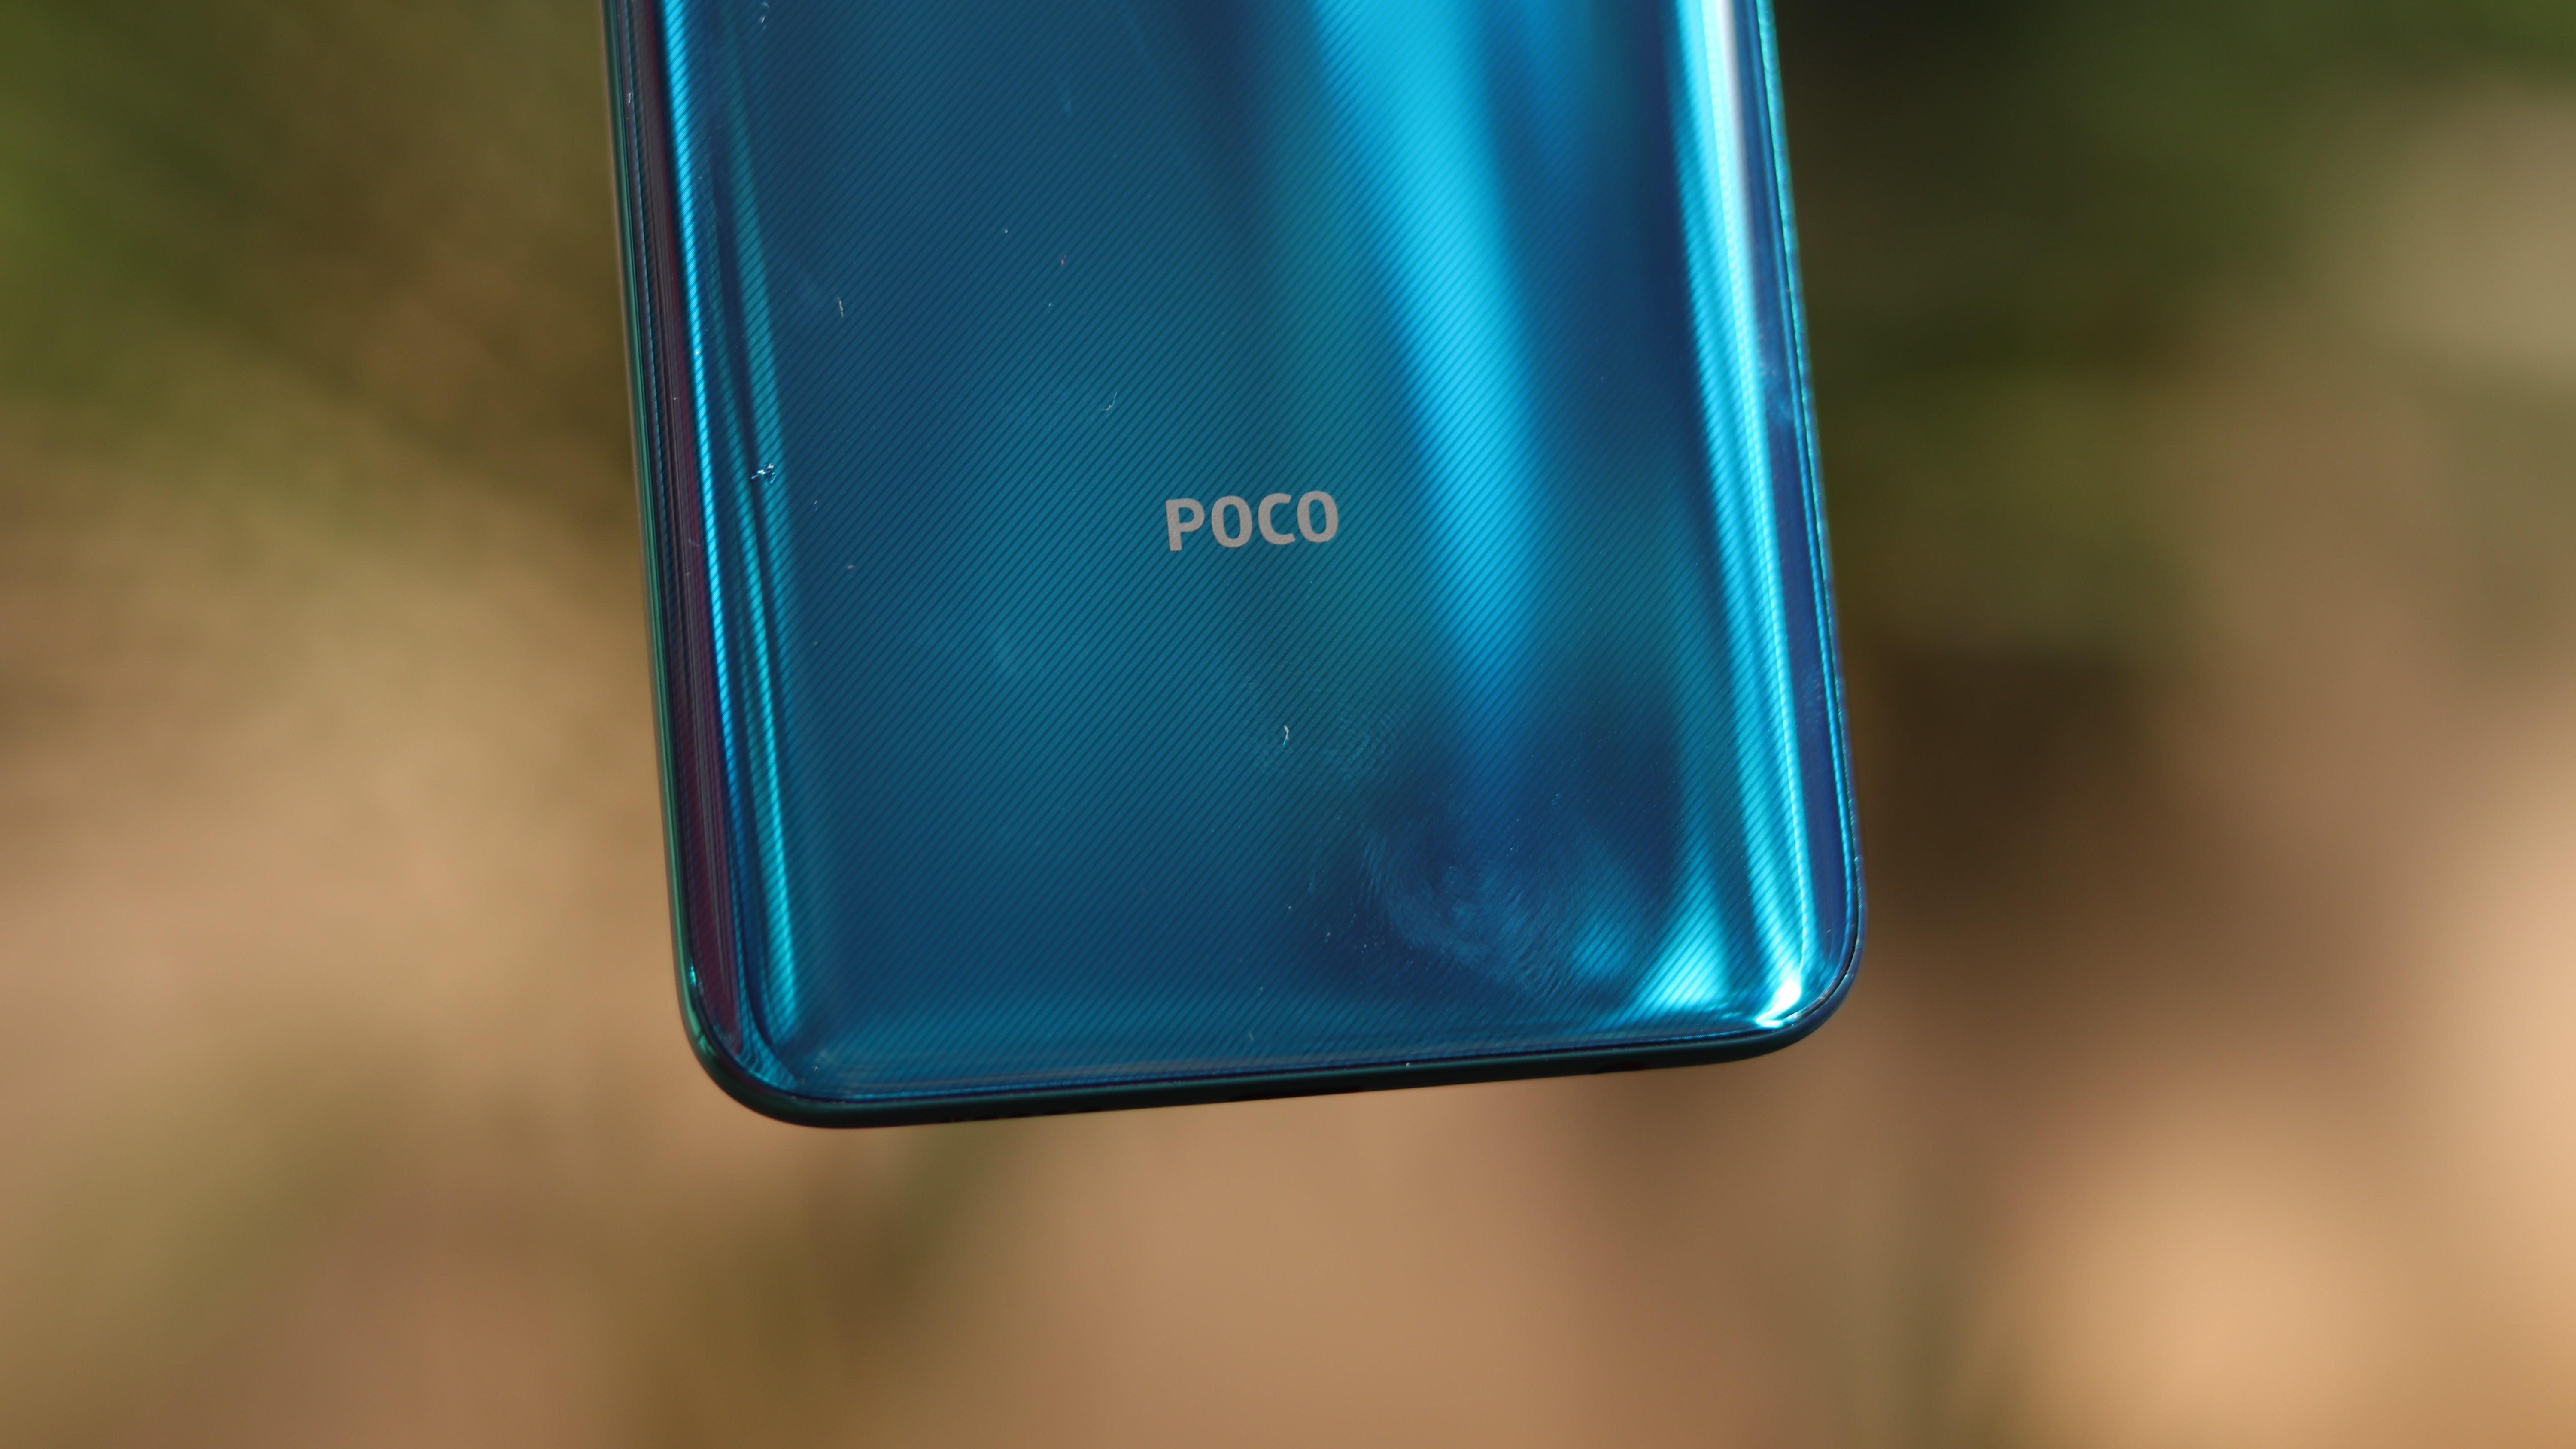 The POCO X3 Pro might launch in India soon following its BIS approval -   News